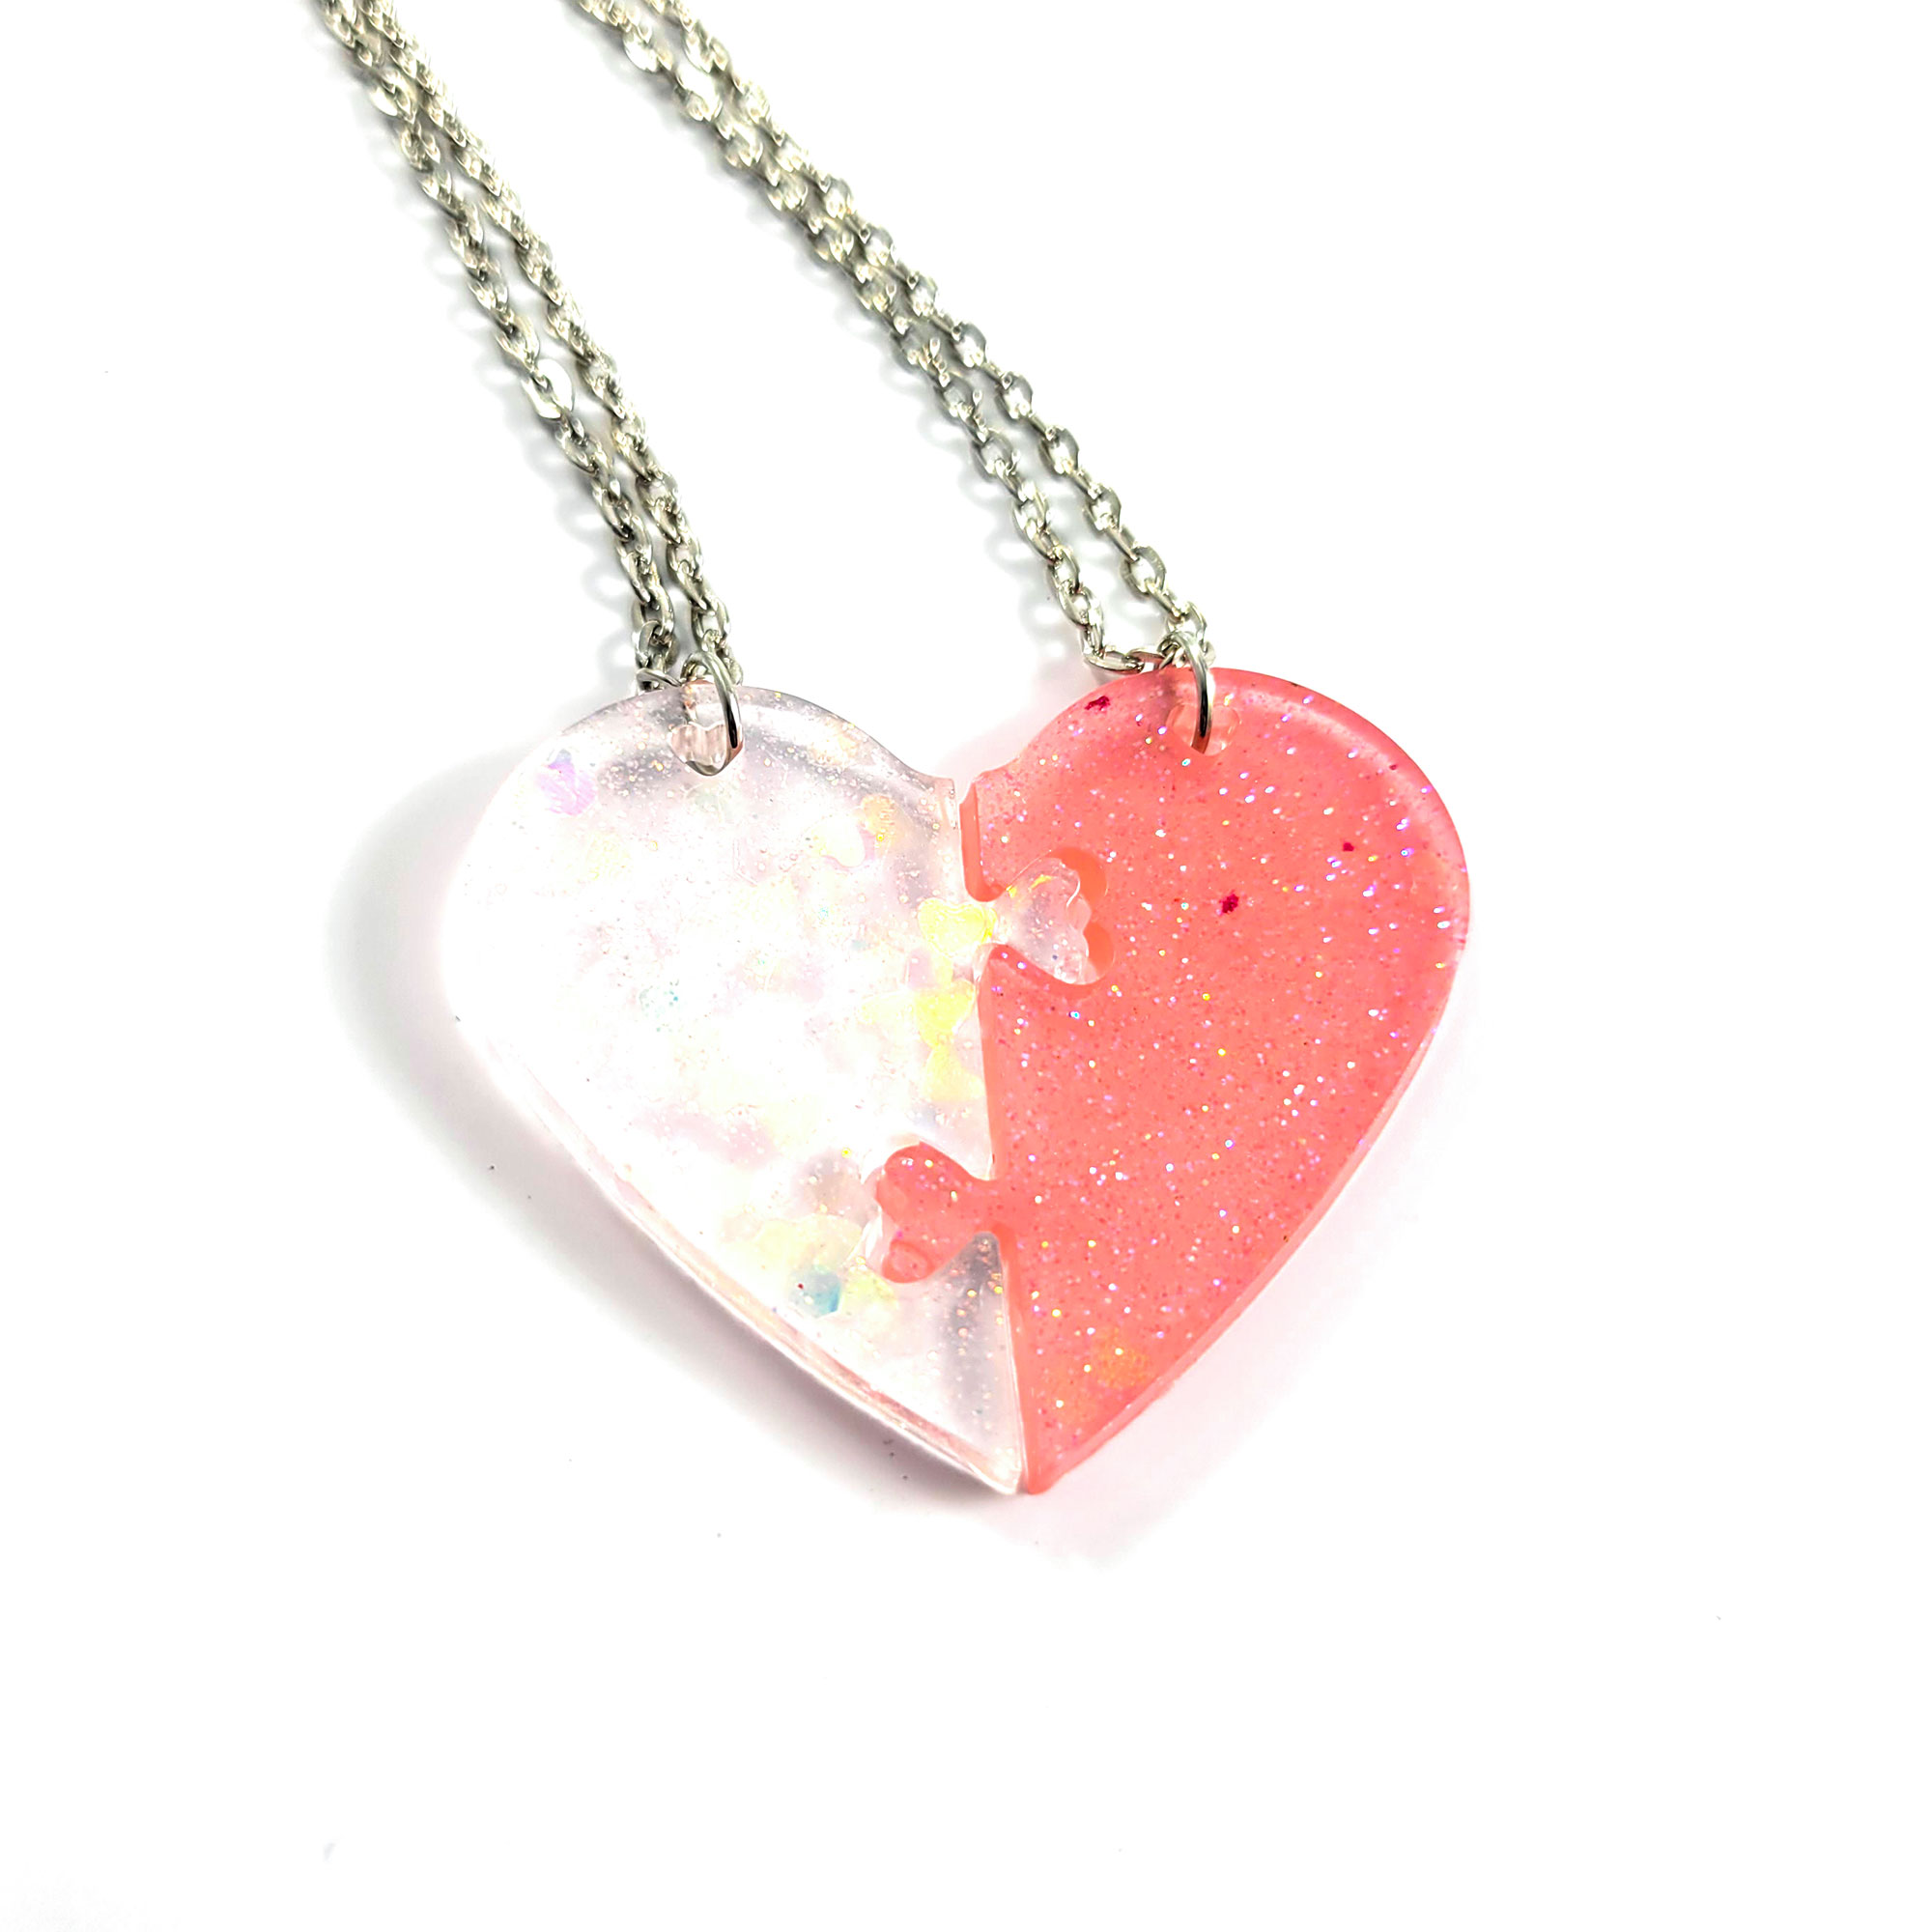 Forever Together Heart Friendship Necklace by Wilde Designs